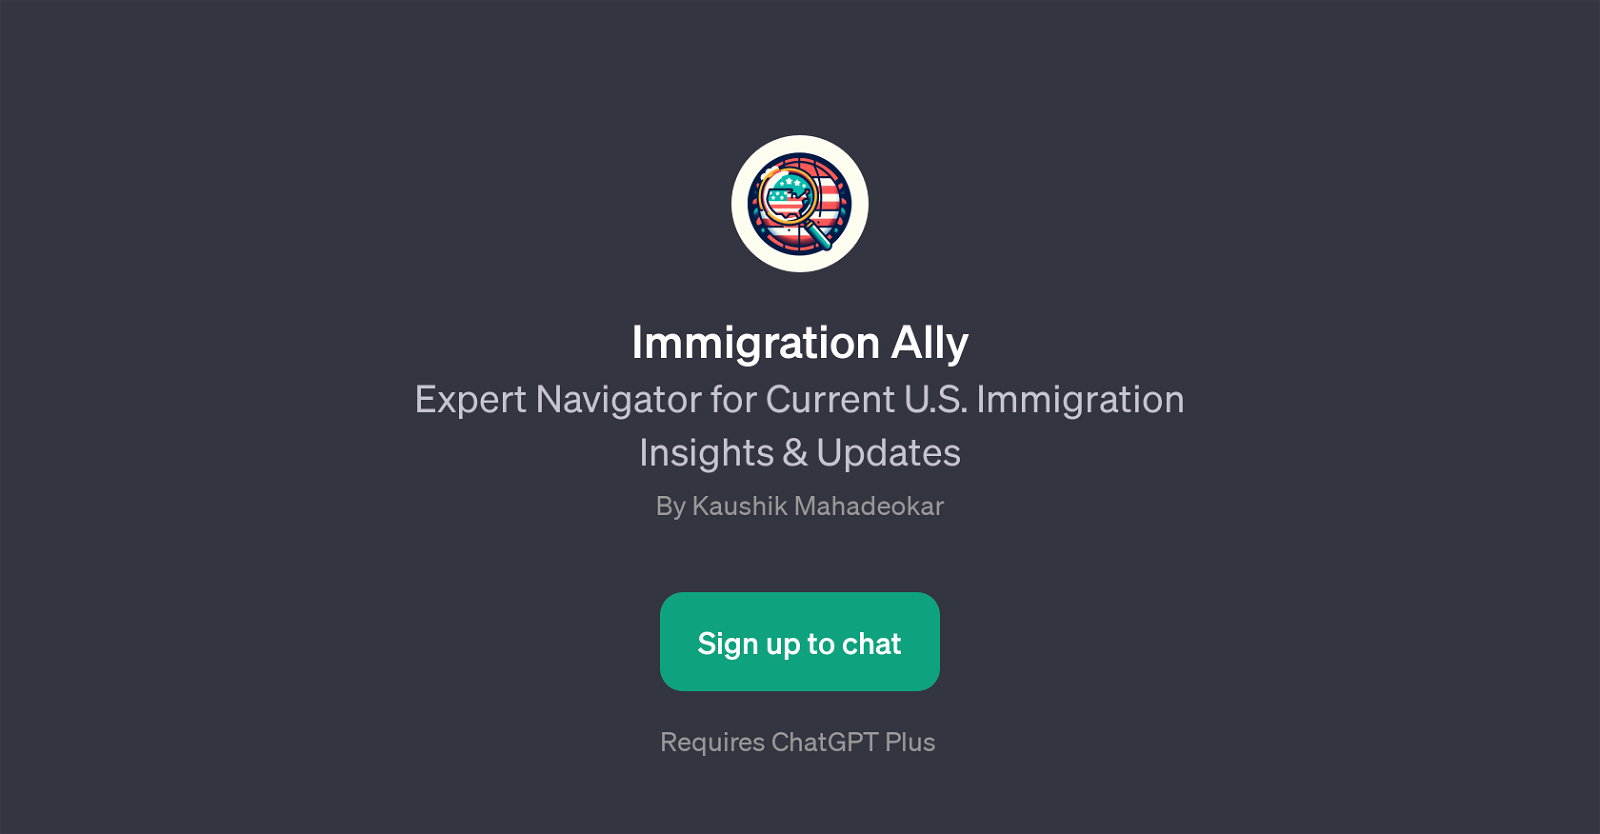 Immigration Ally website